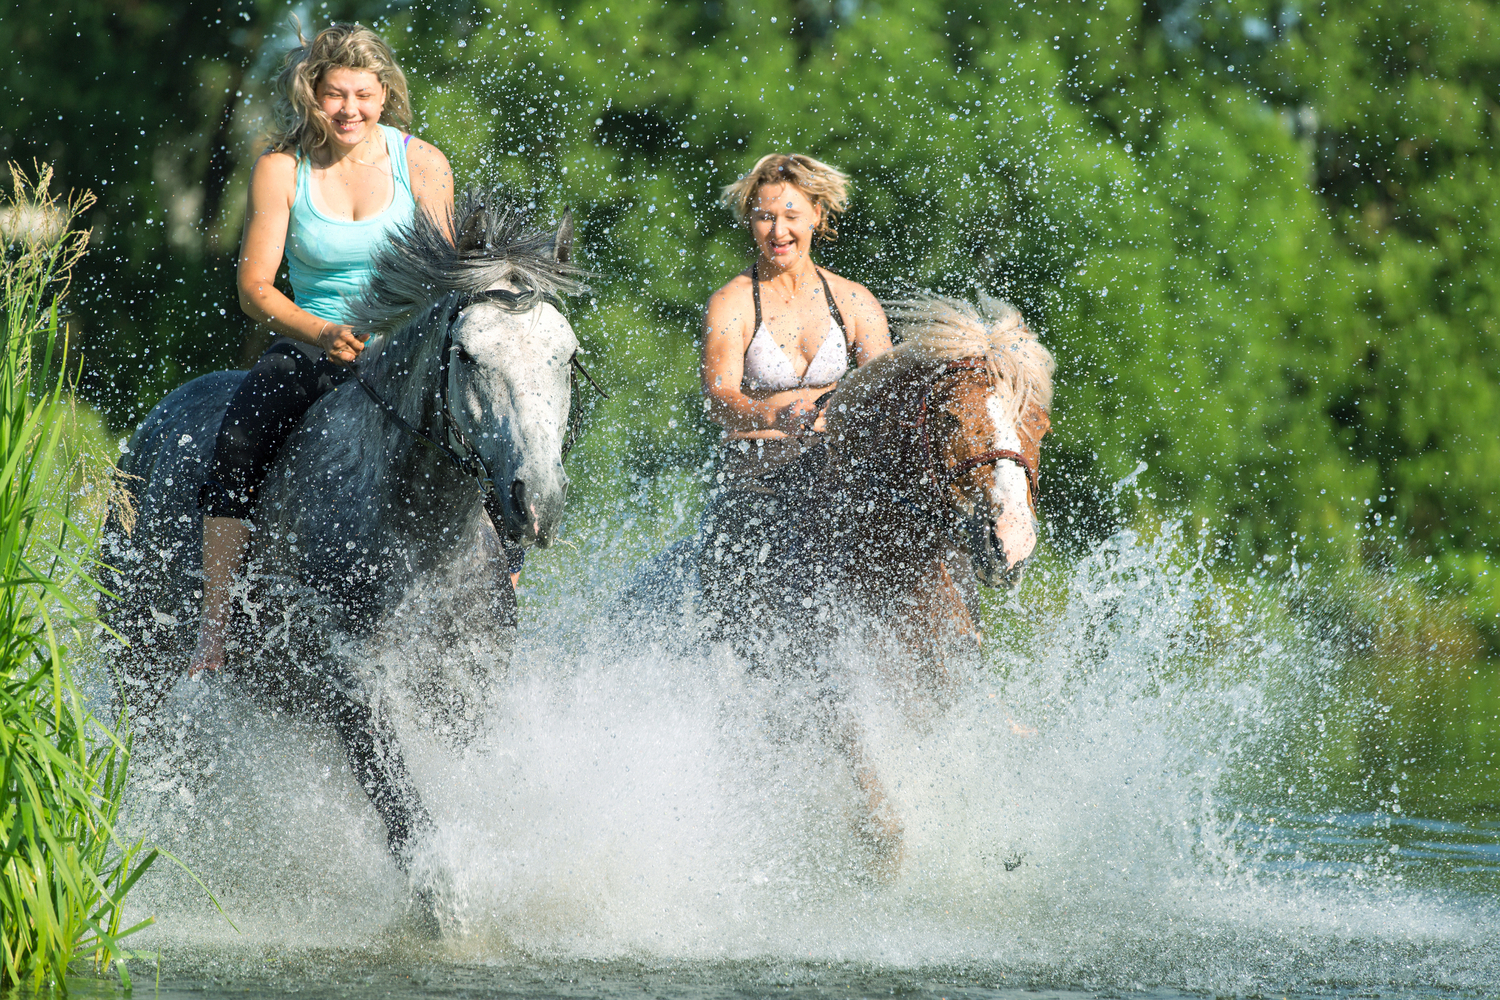 A couple of young women gleefully blast through a shallow stream while atop their trusty steeds.